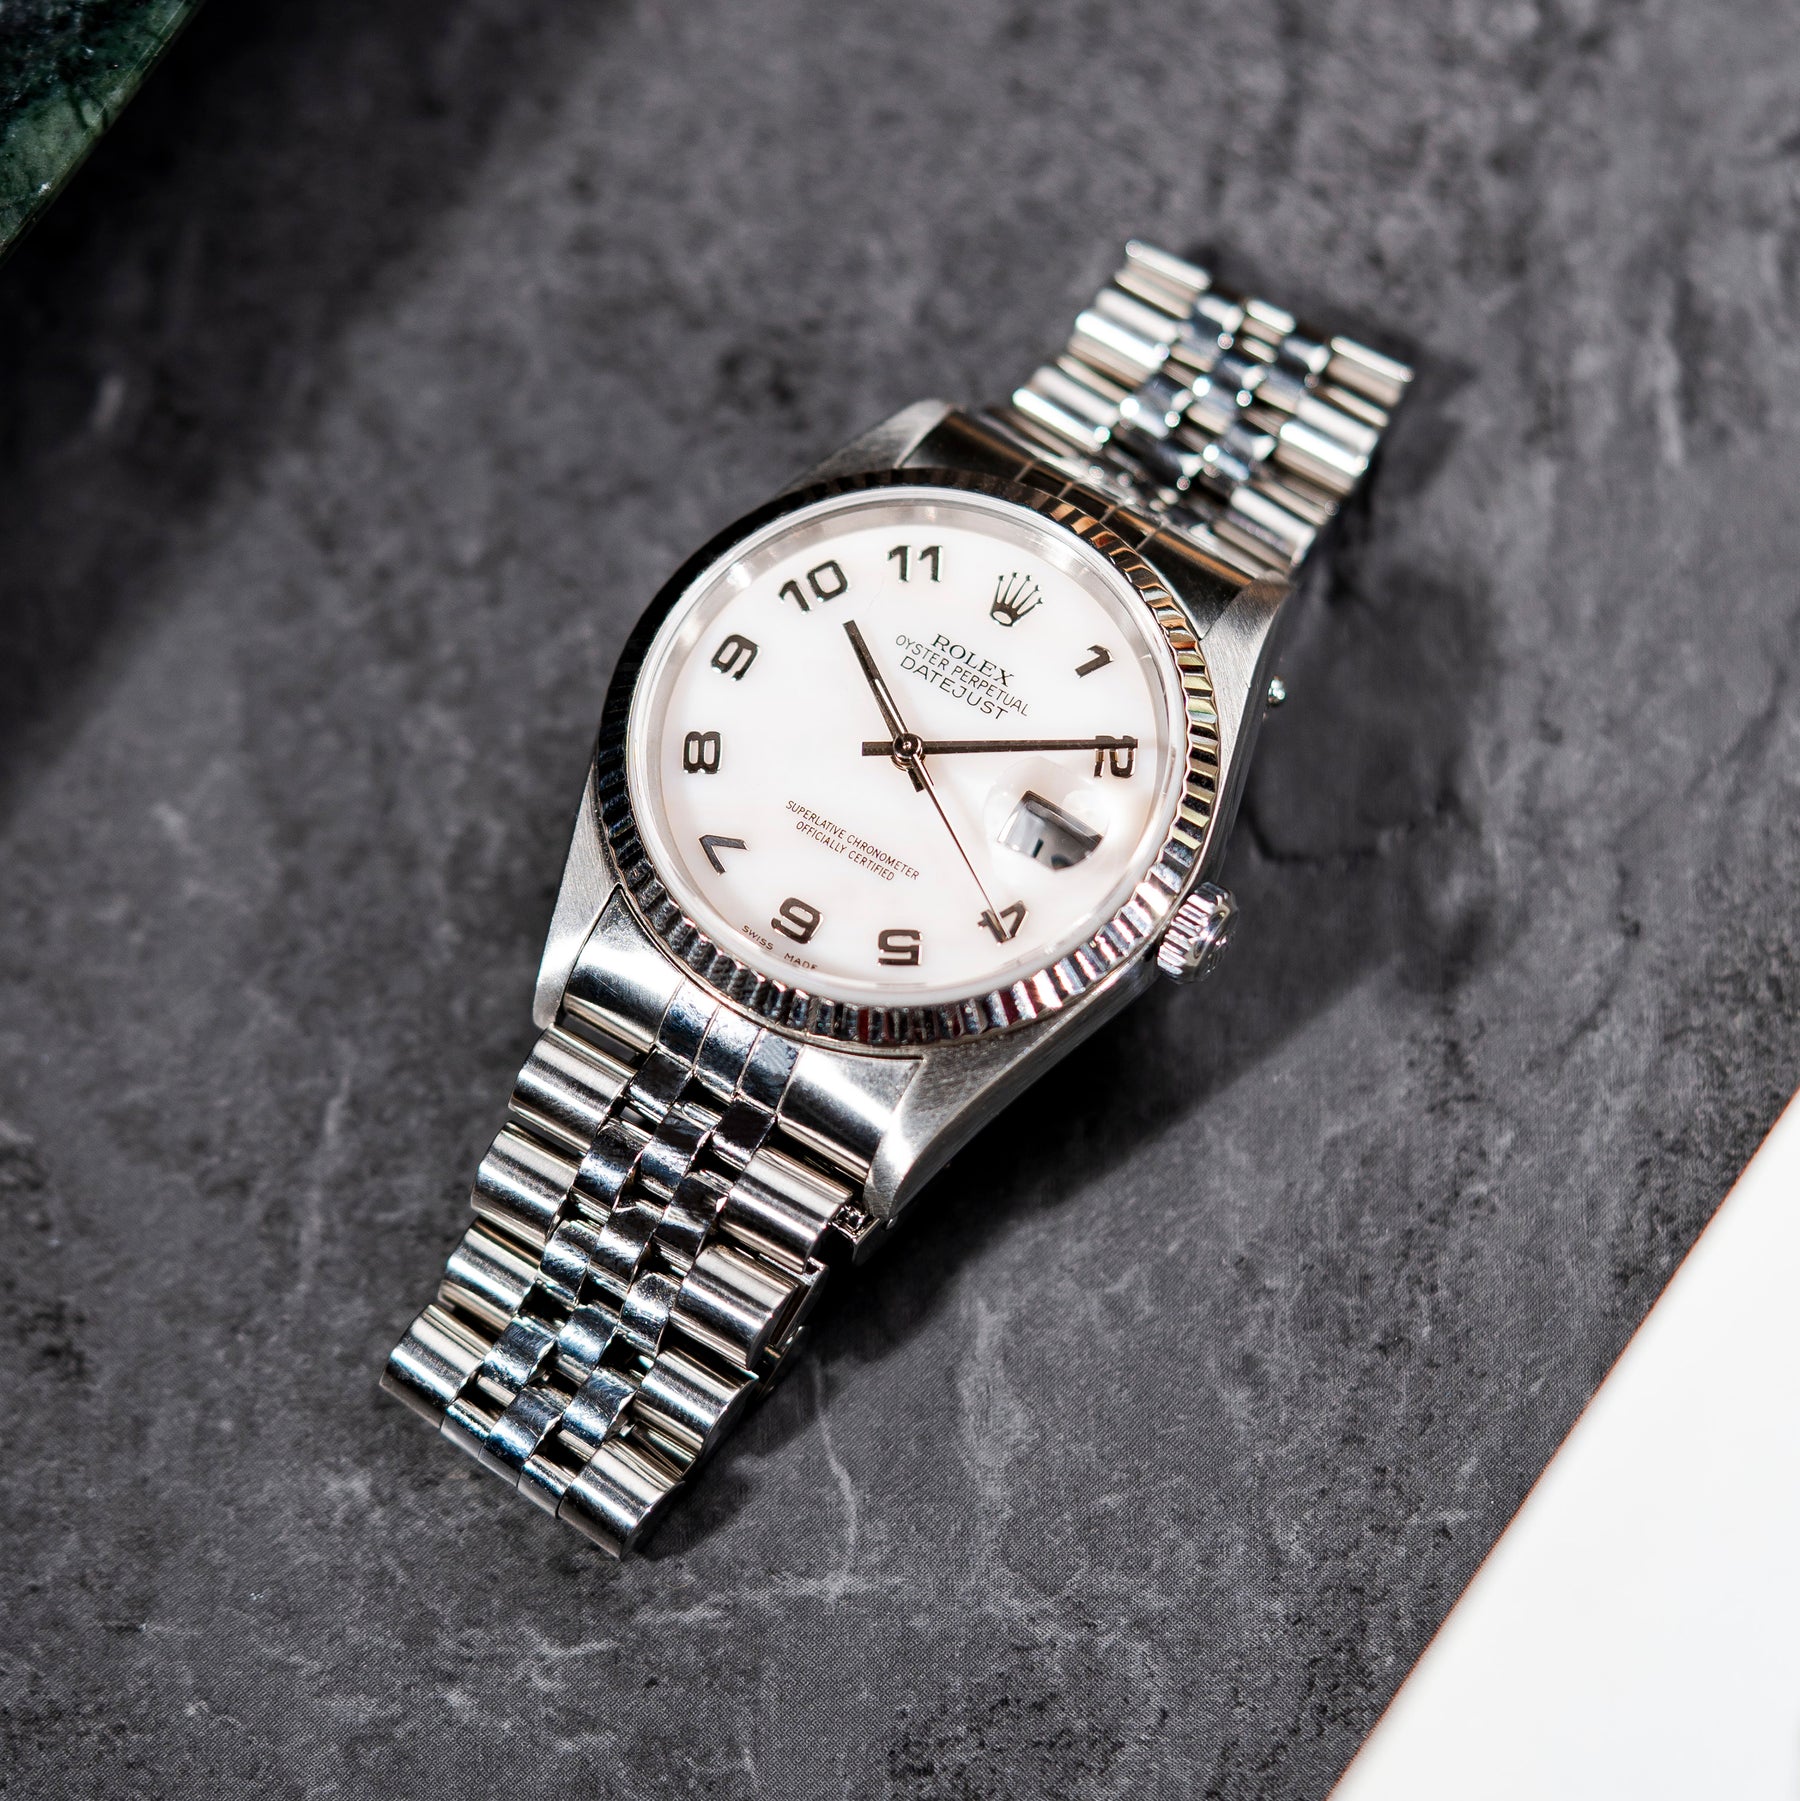 2000 Rolex Datejust Mother of Pearl Dial Ref. 16234